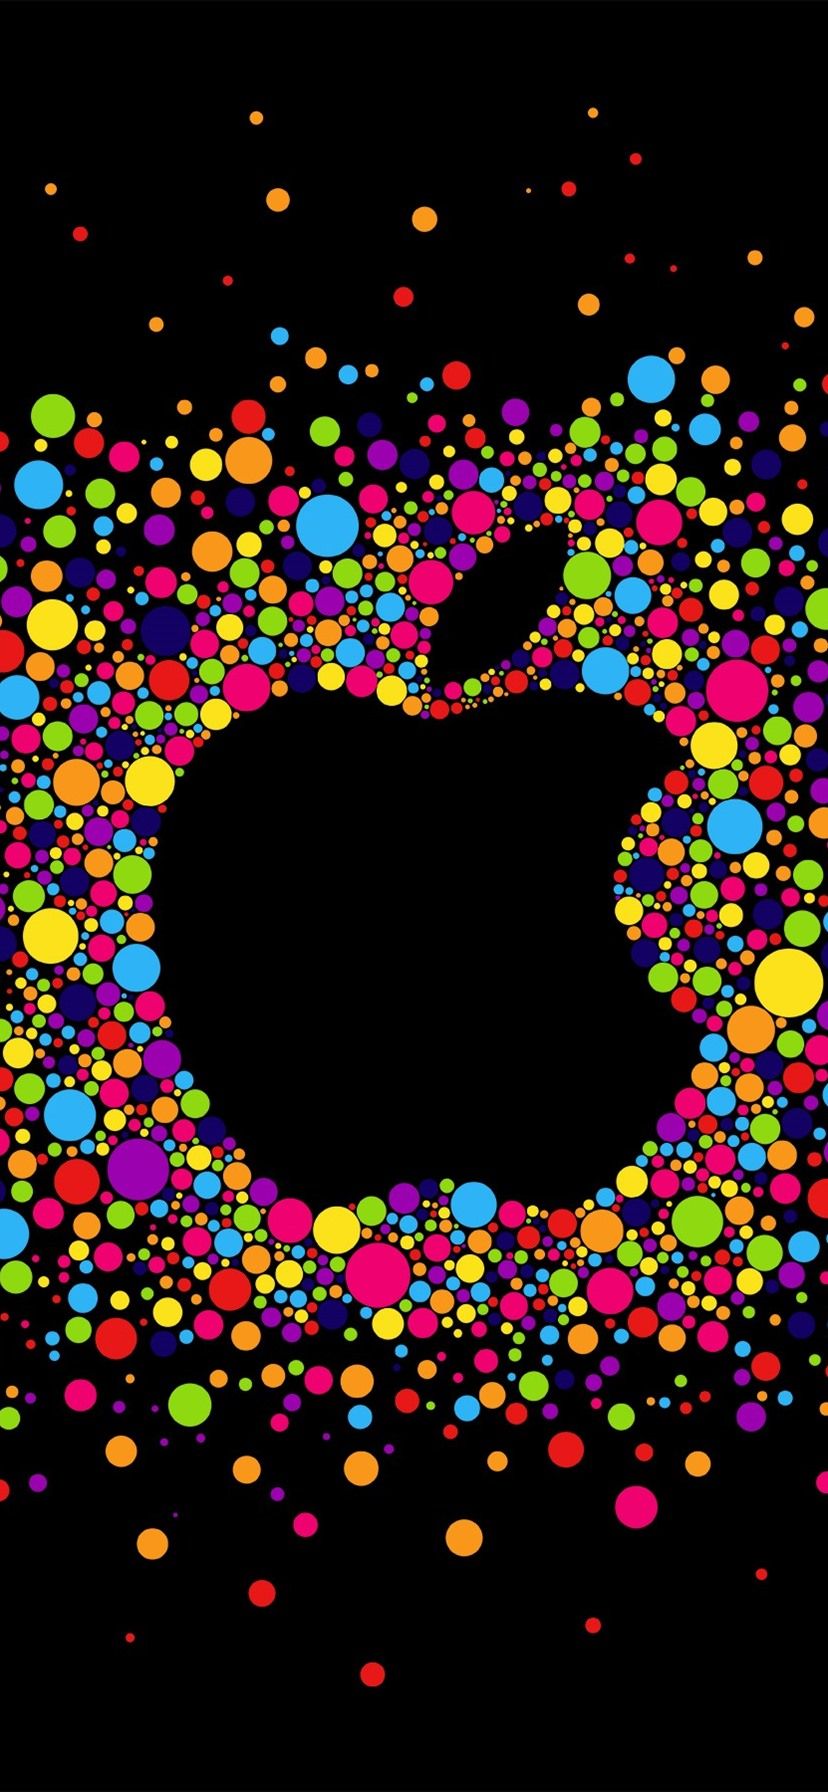 Colorful circles, Apple logo, black backgrounds 828x1792 iPhone 11